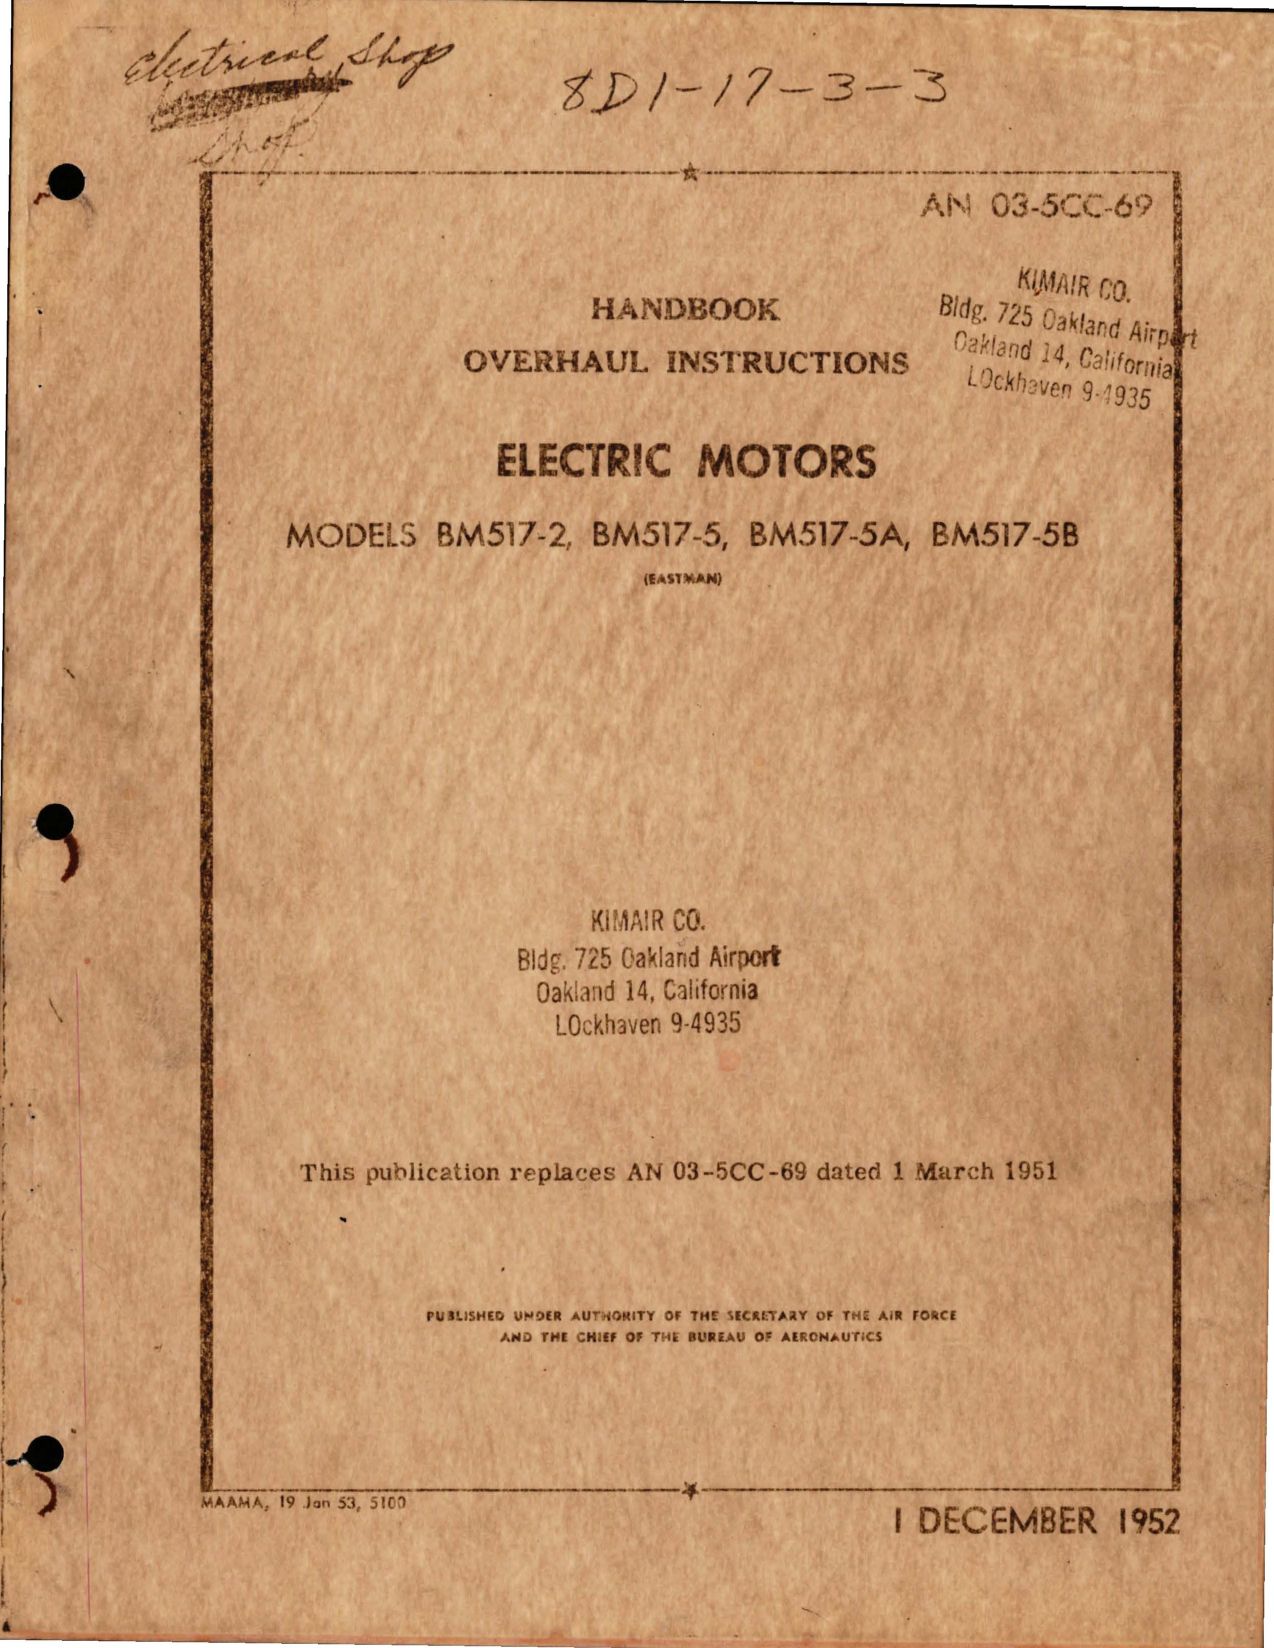 Sample page 1 from AirCorps Library document: Overhaul Instructions for Electric Motors - Models BM517-2, BM517-5, BM517-5A, and BM517-5B 